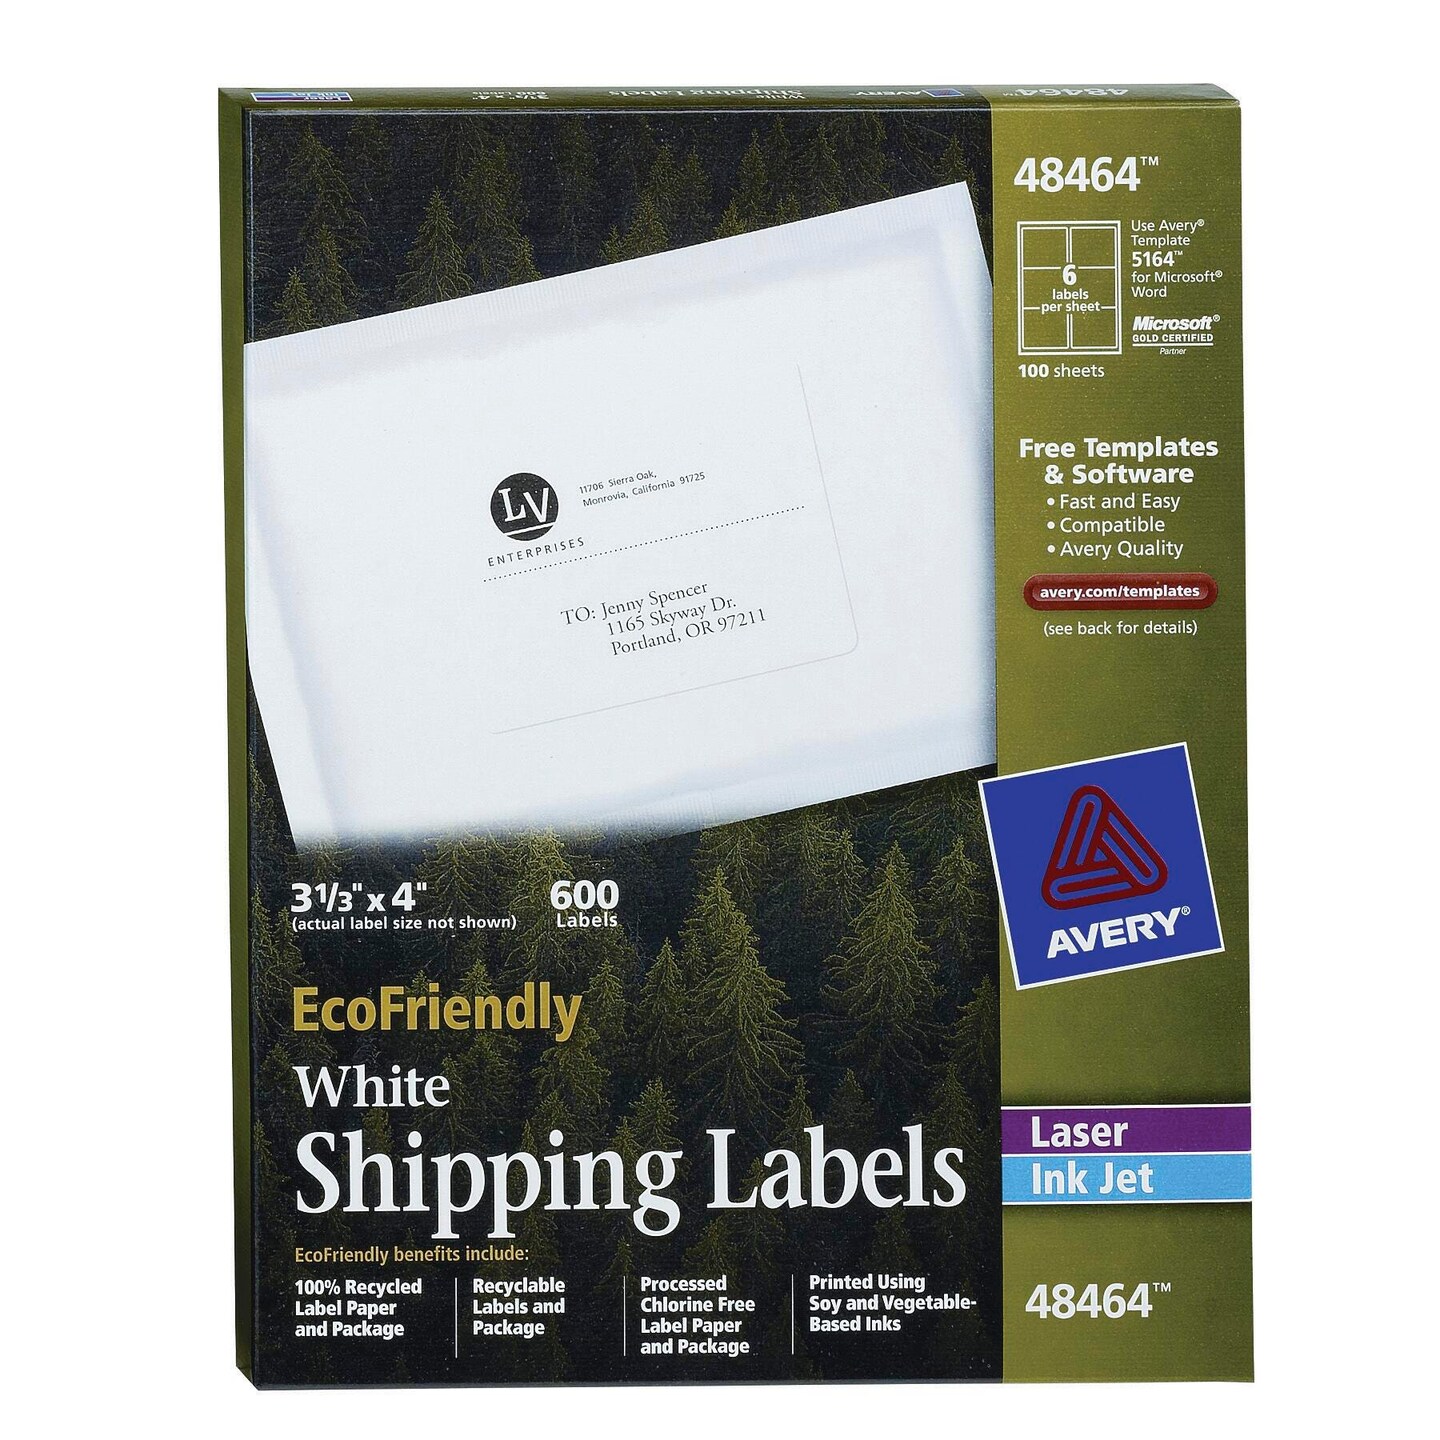 Avery EcoFriendly Shipping Labels, 3-1/3 x 4 Inches, Pack of 600